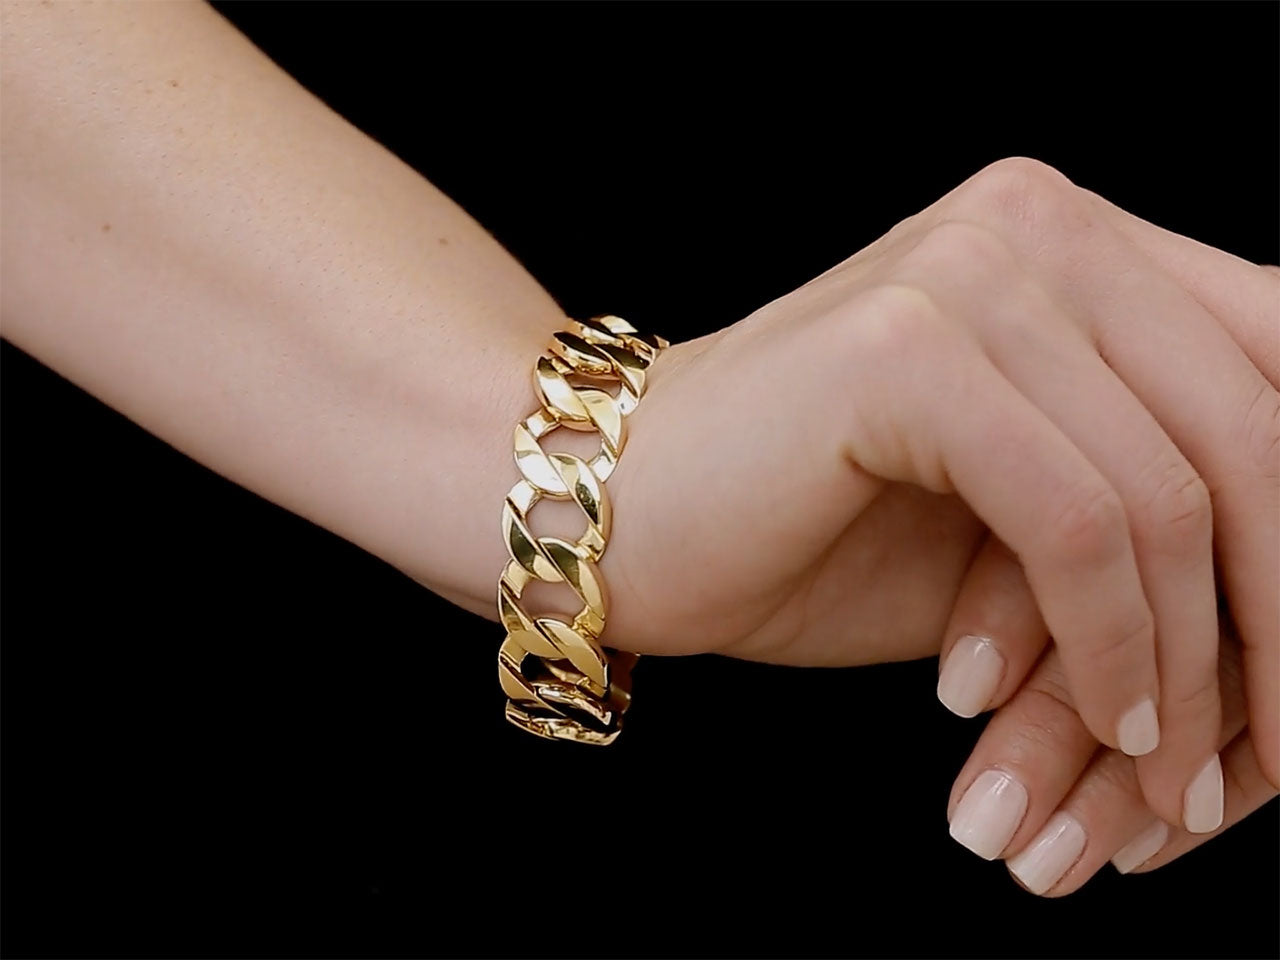 Curb Link Bracelet in 18K Gold, Small, by Beladora